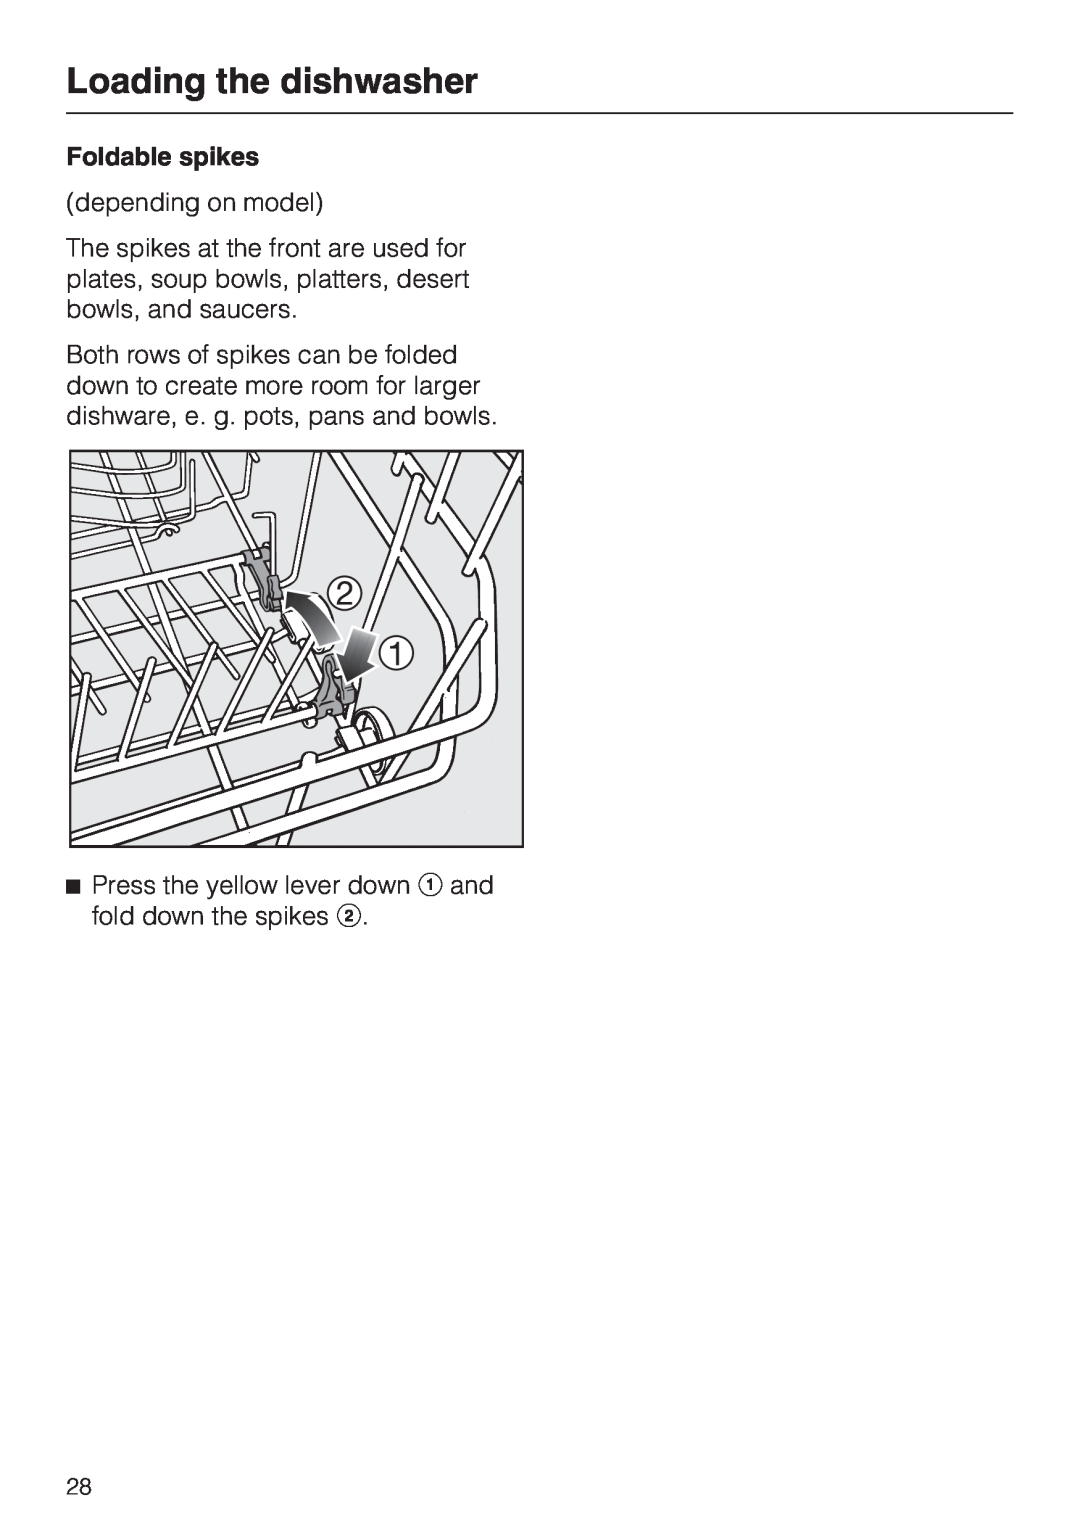 Miele G 5705, G 5700 operating instructions Loading the dishwasher, depending on model 